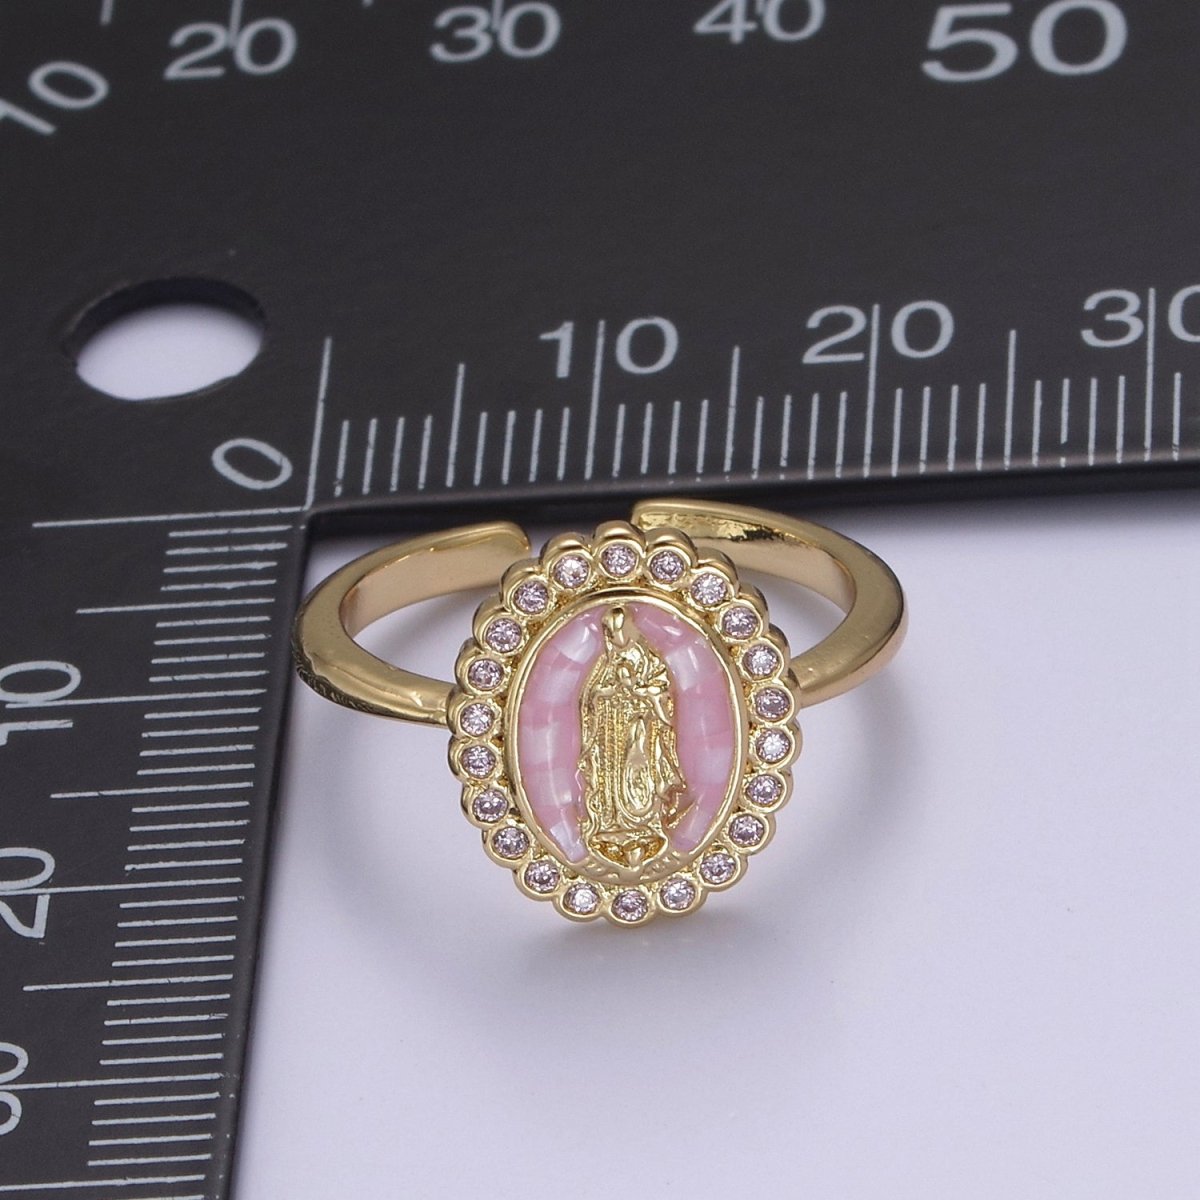 Virgin Mary Ring, 14K Gold Filled Religious Medallion Ring, Mother Mary Statement Ring, cz Lady of Guadalupe Ring S-401 to S-404 - DLUXCA